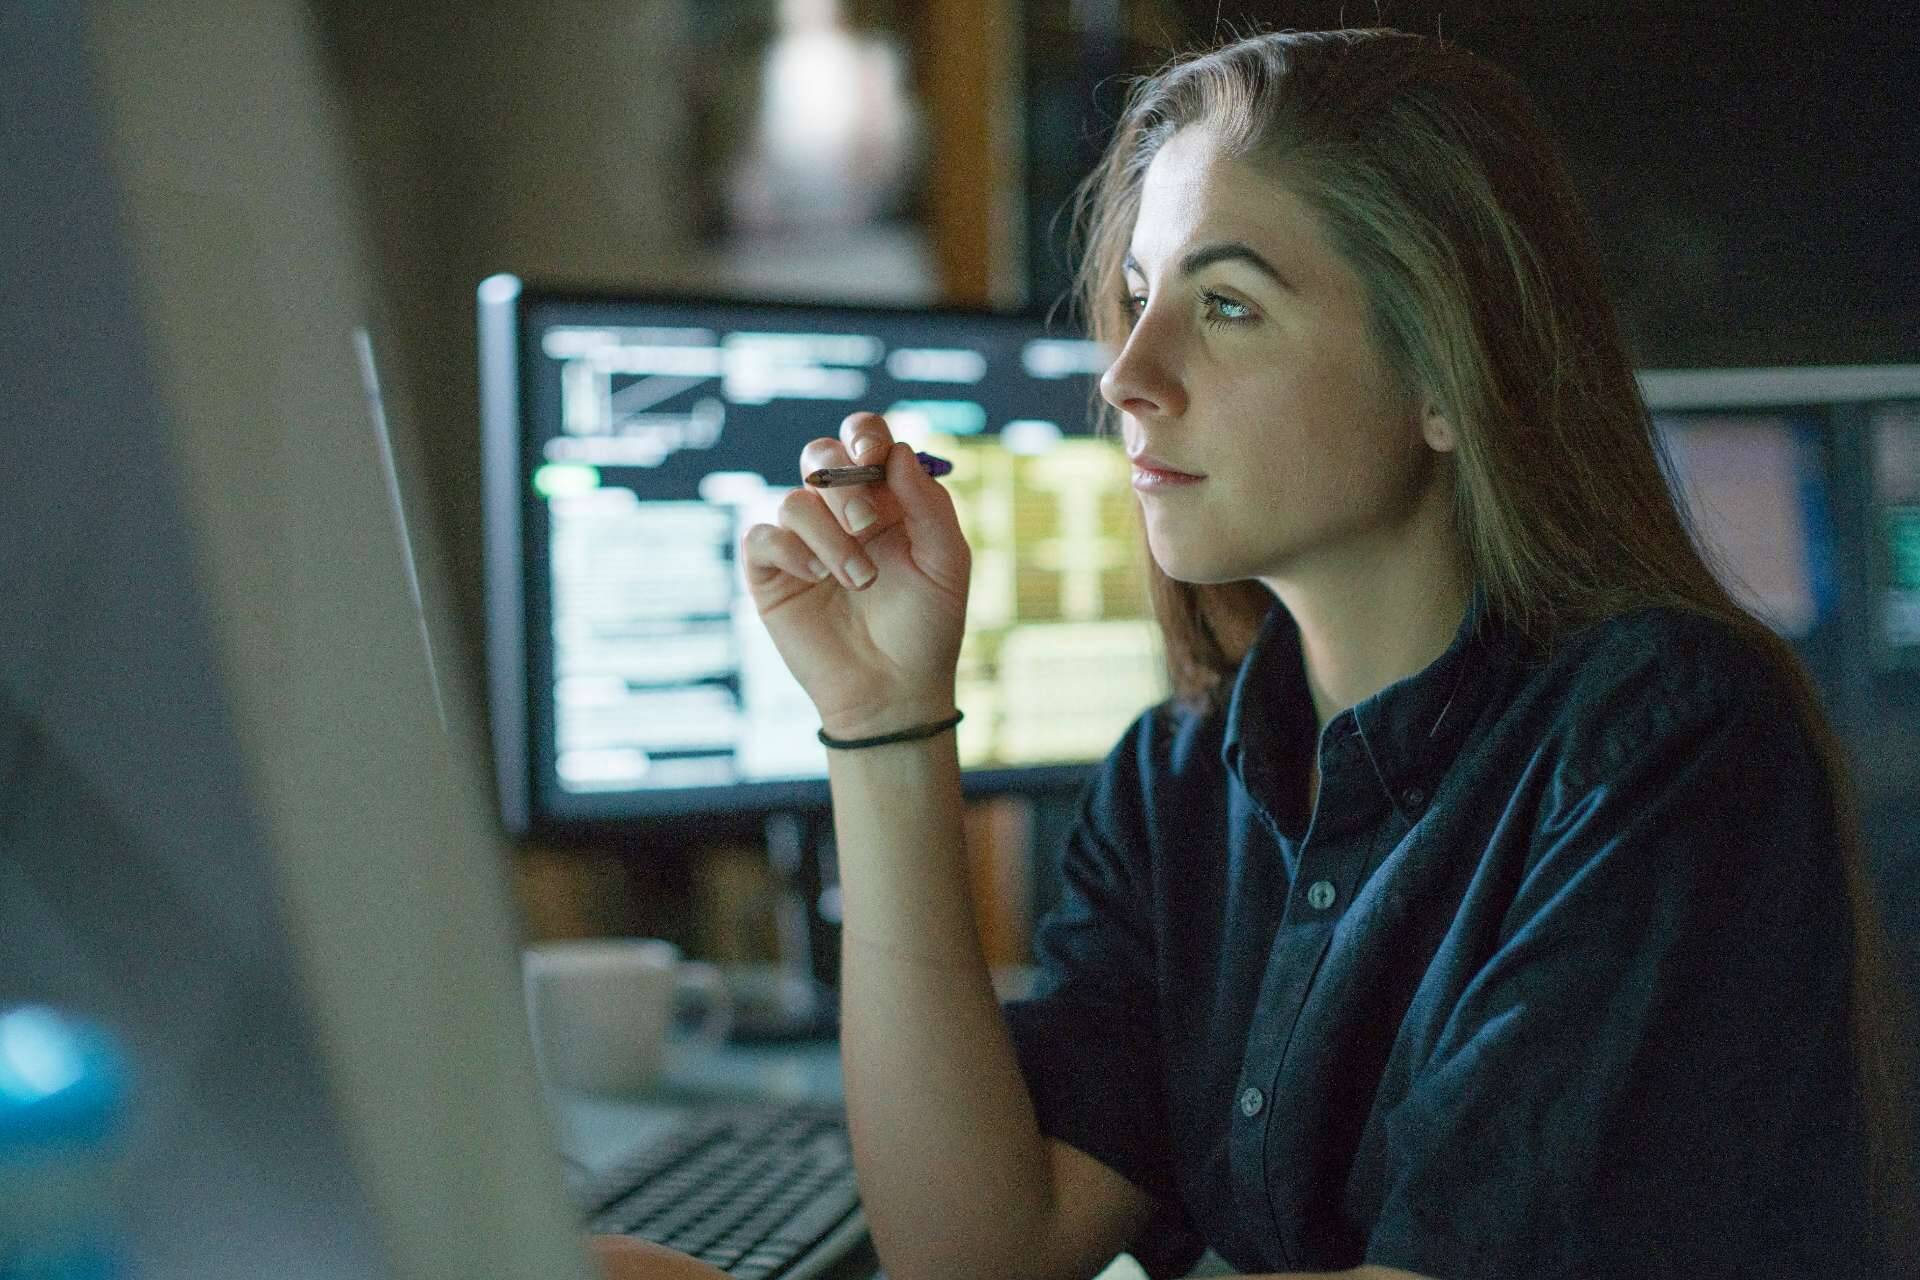 Woman at computer concentrating on screen